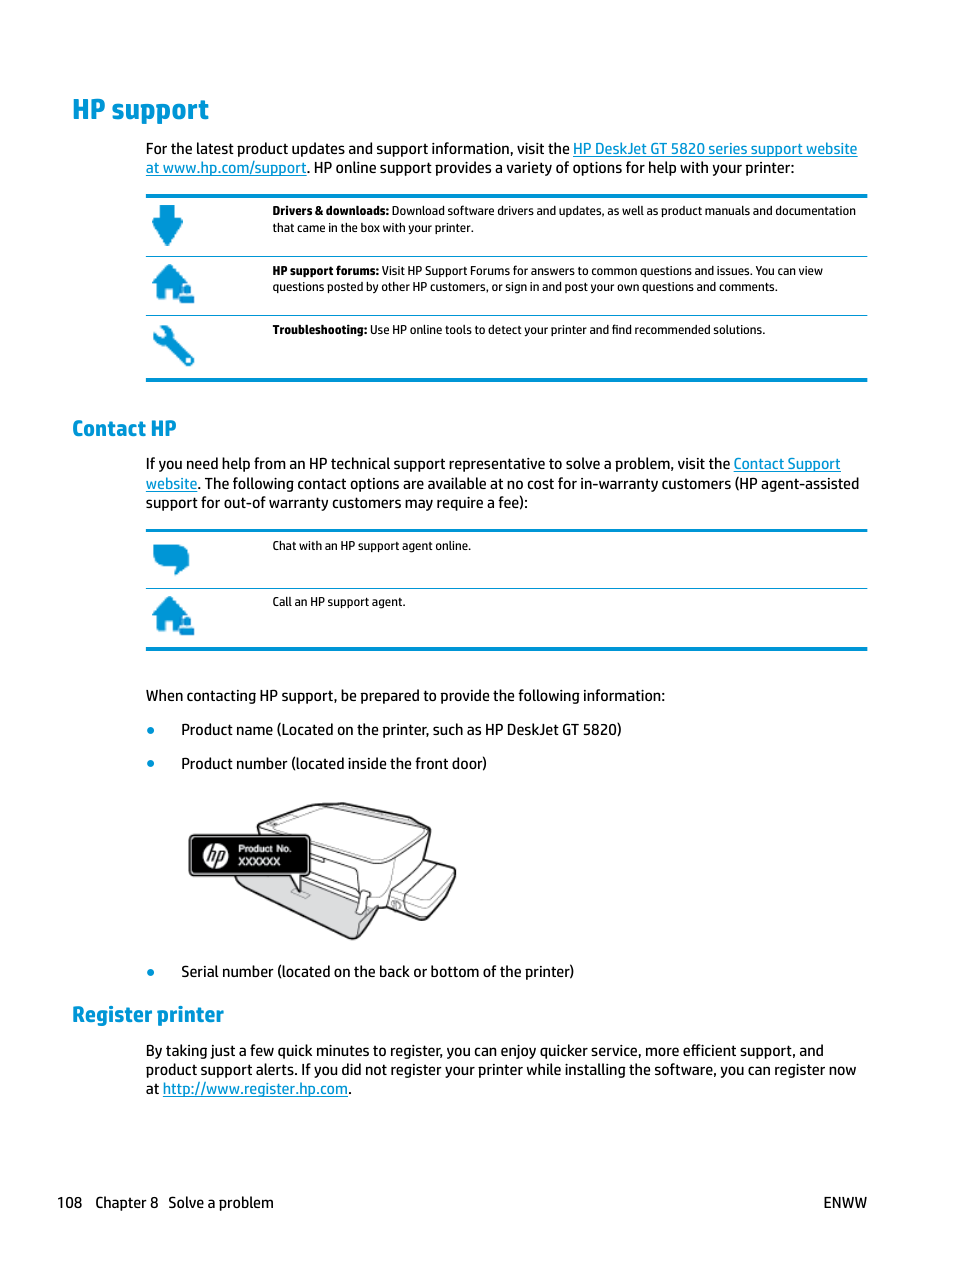 Hp support, Contact hp, Register printer | HP DeskJet GT 5820 User Manual |  Page 114 / 133